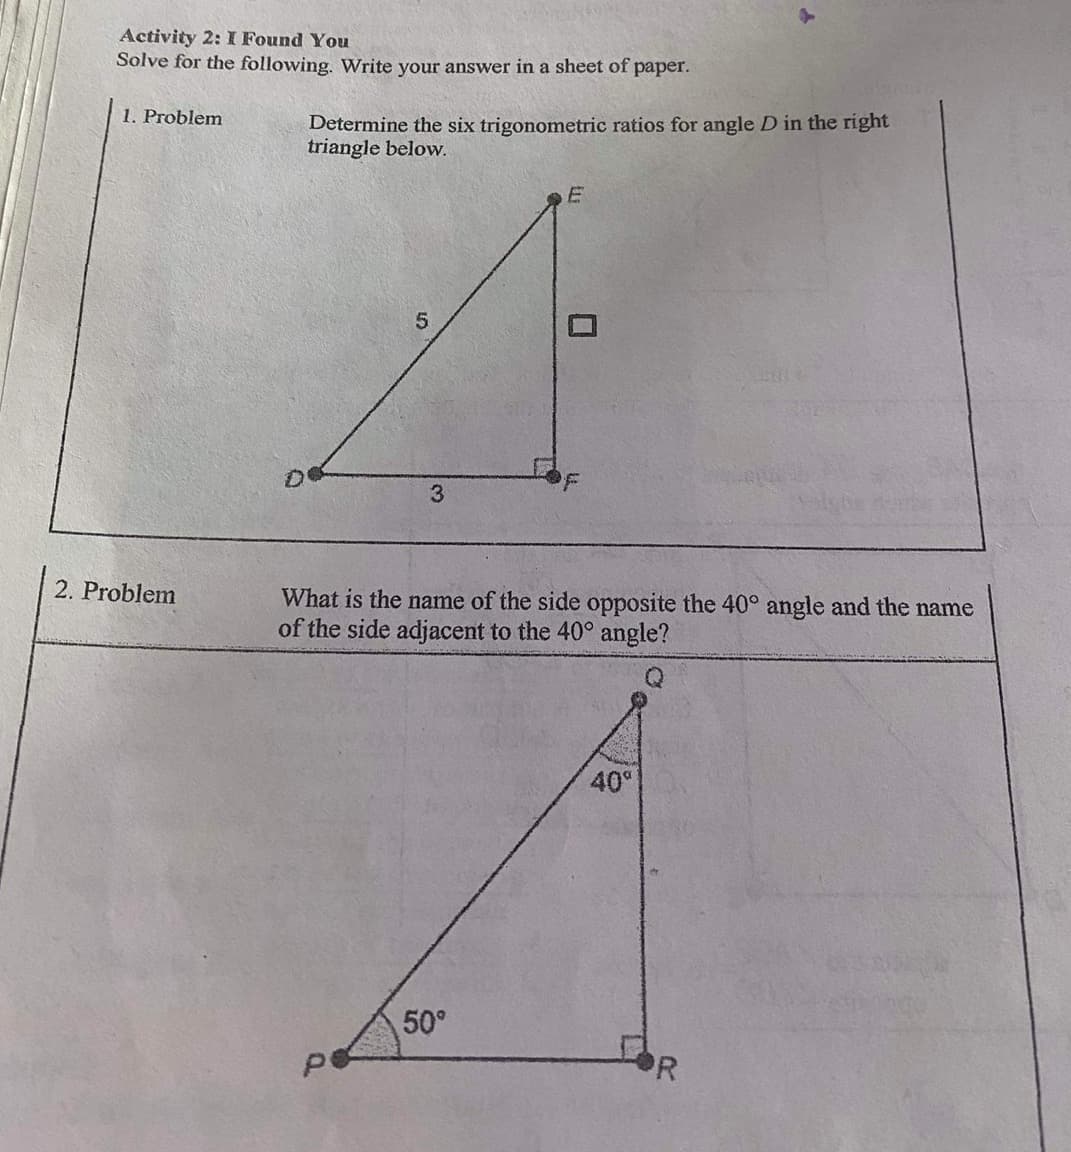 Activity 2: I Found You
Solve for the following. Write your answer in a sheet of paper.
1. Problem
Determine the six trigonometric ratios for angle D in the right
triangle below.
3.
2. Problem
What is the name of the side opposite the 40° angle and the name
of the side adjacent to the 40° angle?
40°
50°
PR
